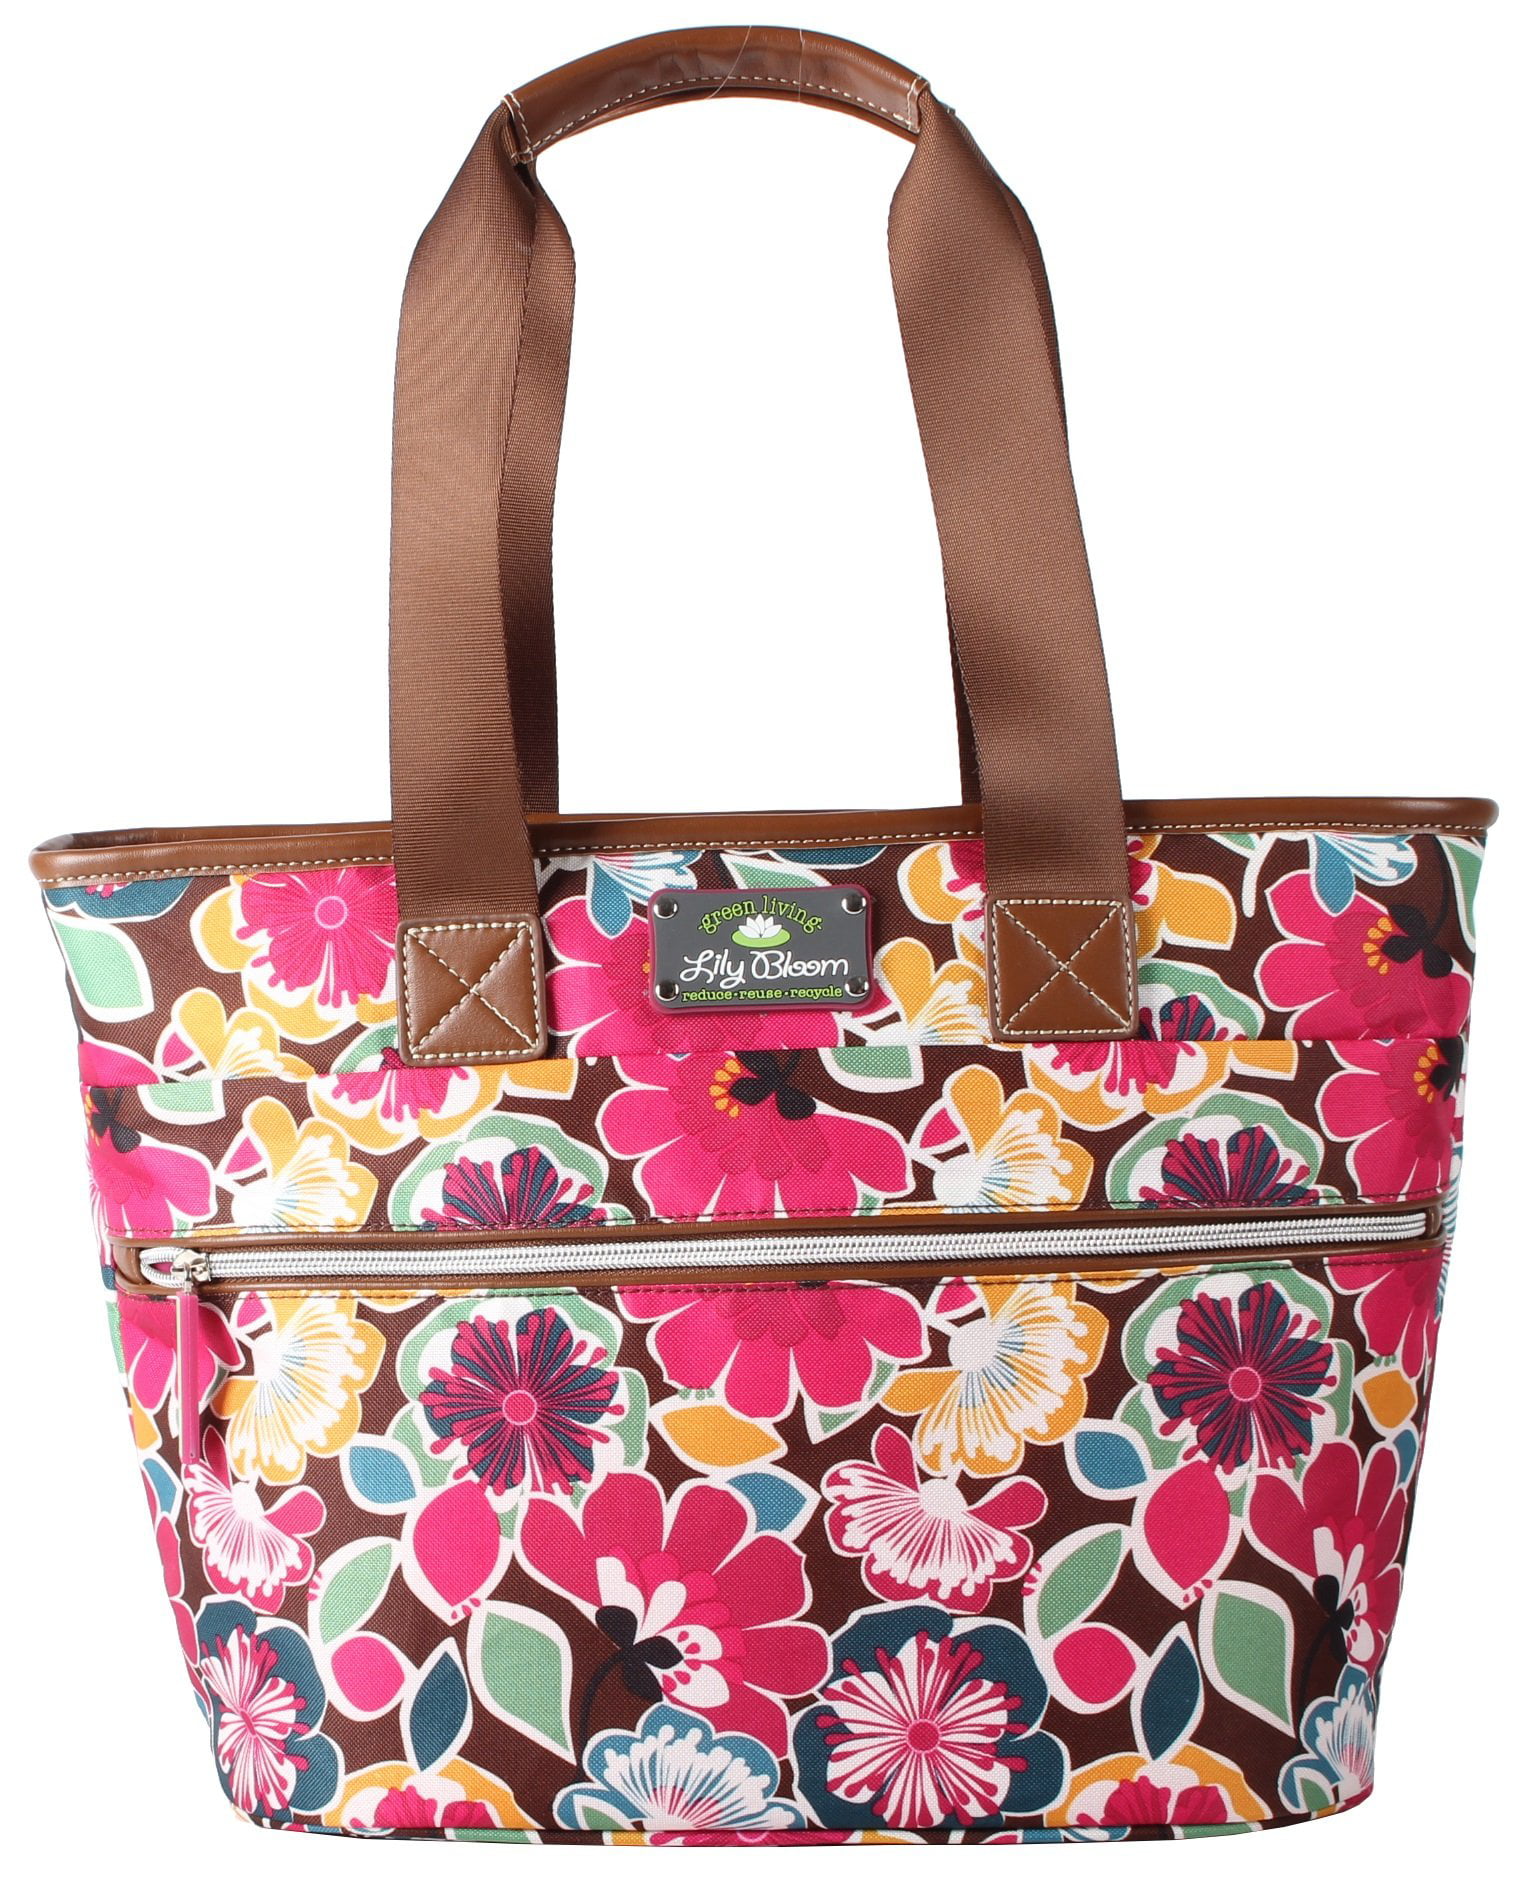 LILY BLOOM REUSABLE INSULATED LUNCH BOX TOTE BAG COOLER FLOWERS BIRD WOMEN GIRLS 